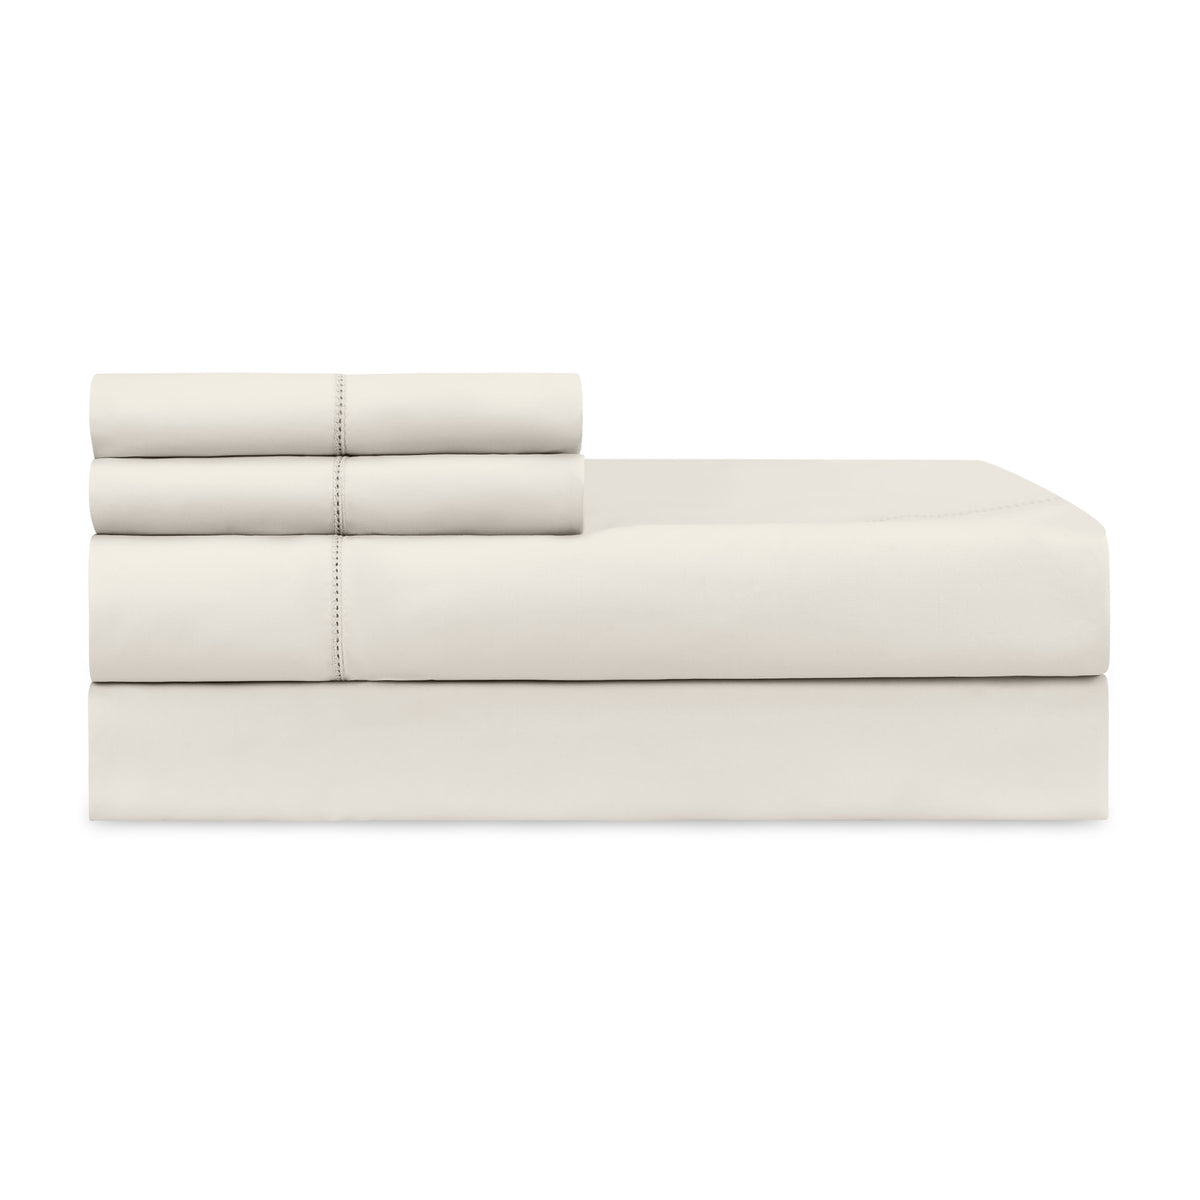 Sheet Set of Home Treasures Perla Percale Bedding in Oyster Color